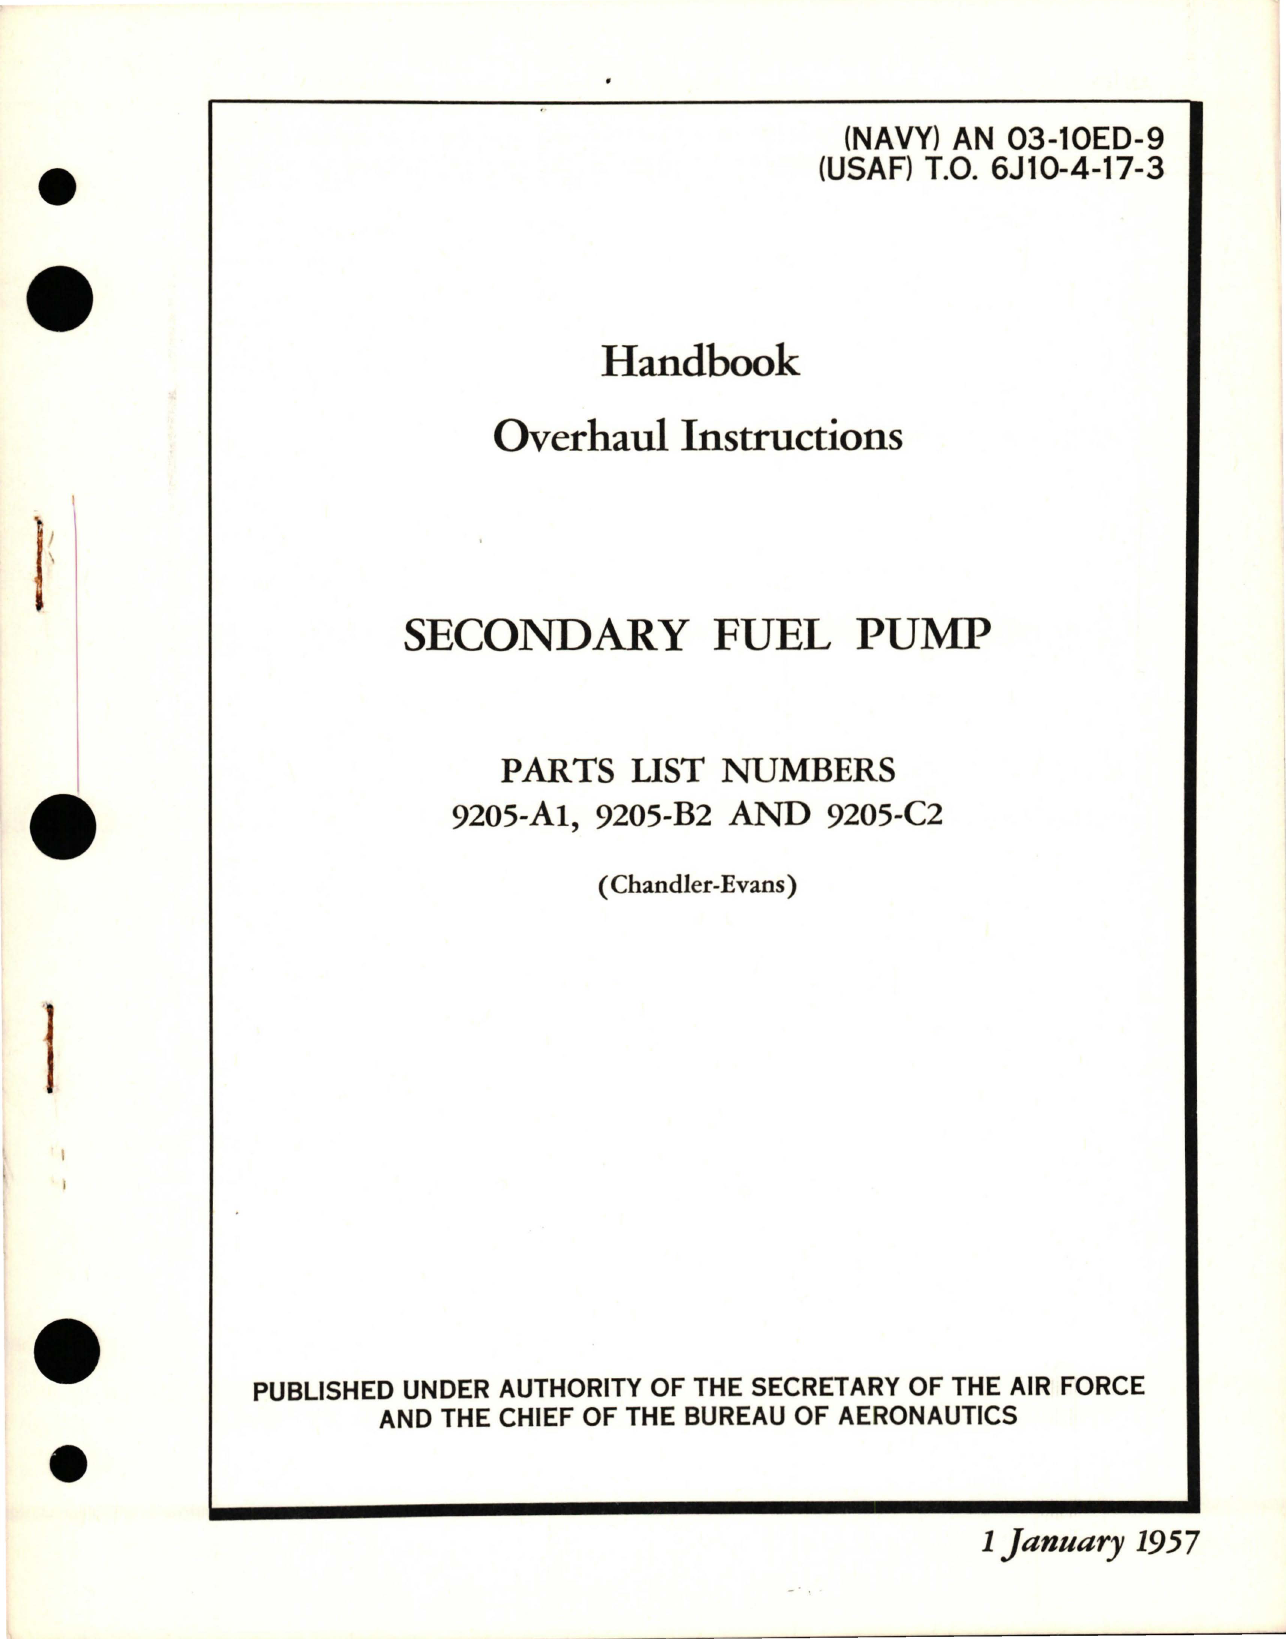 Sample page 1 from AirCorps Library document: Overhaul Instructions for Secondary Fuel Pump - Parts 9205-A1, 9205-B2 and 9205-C2